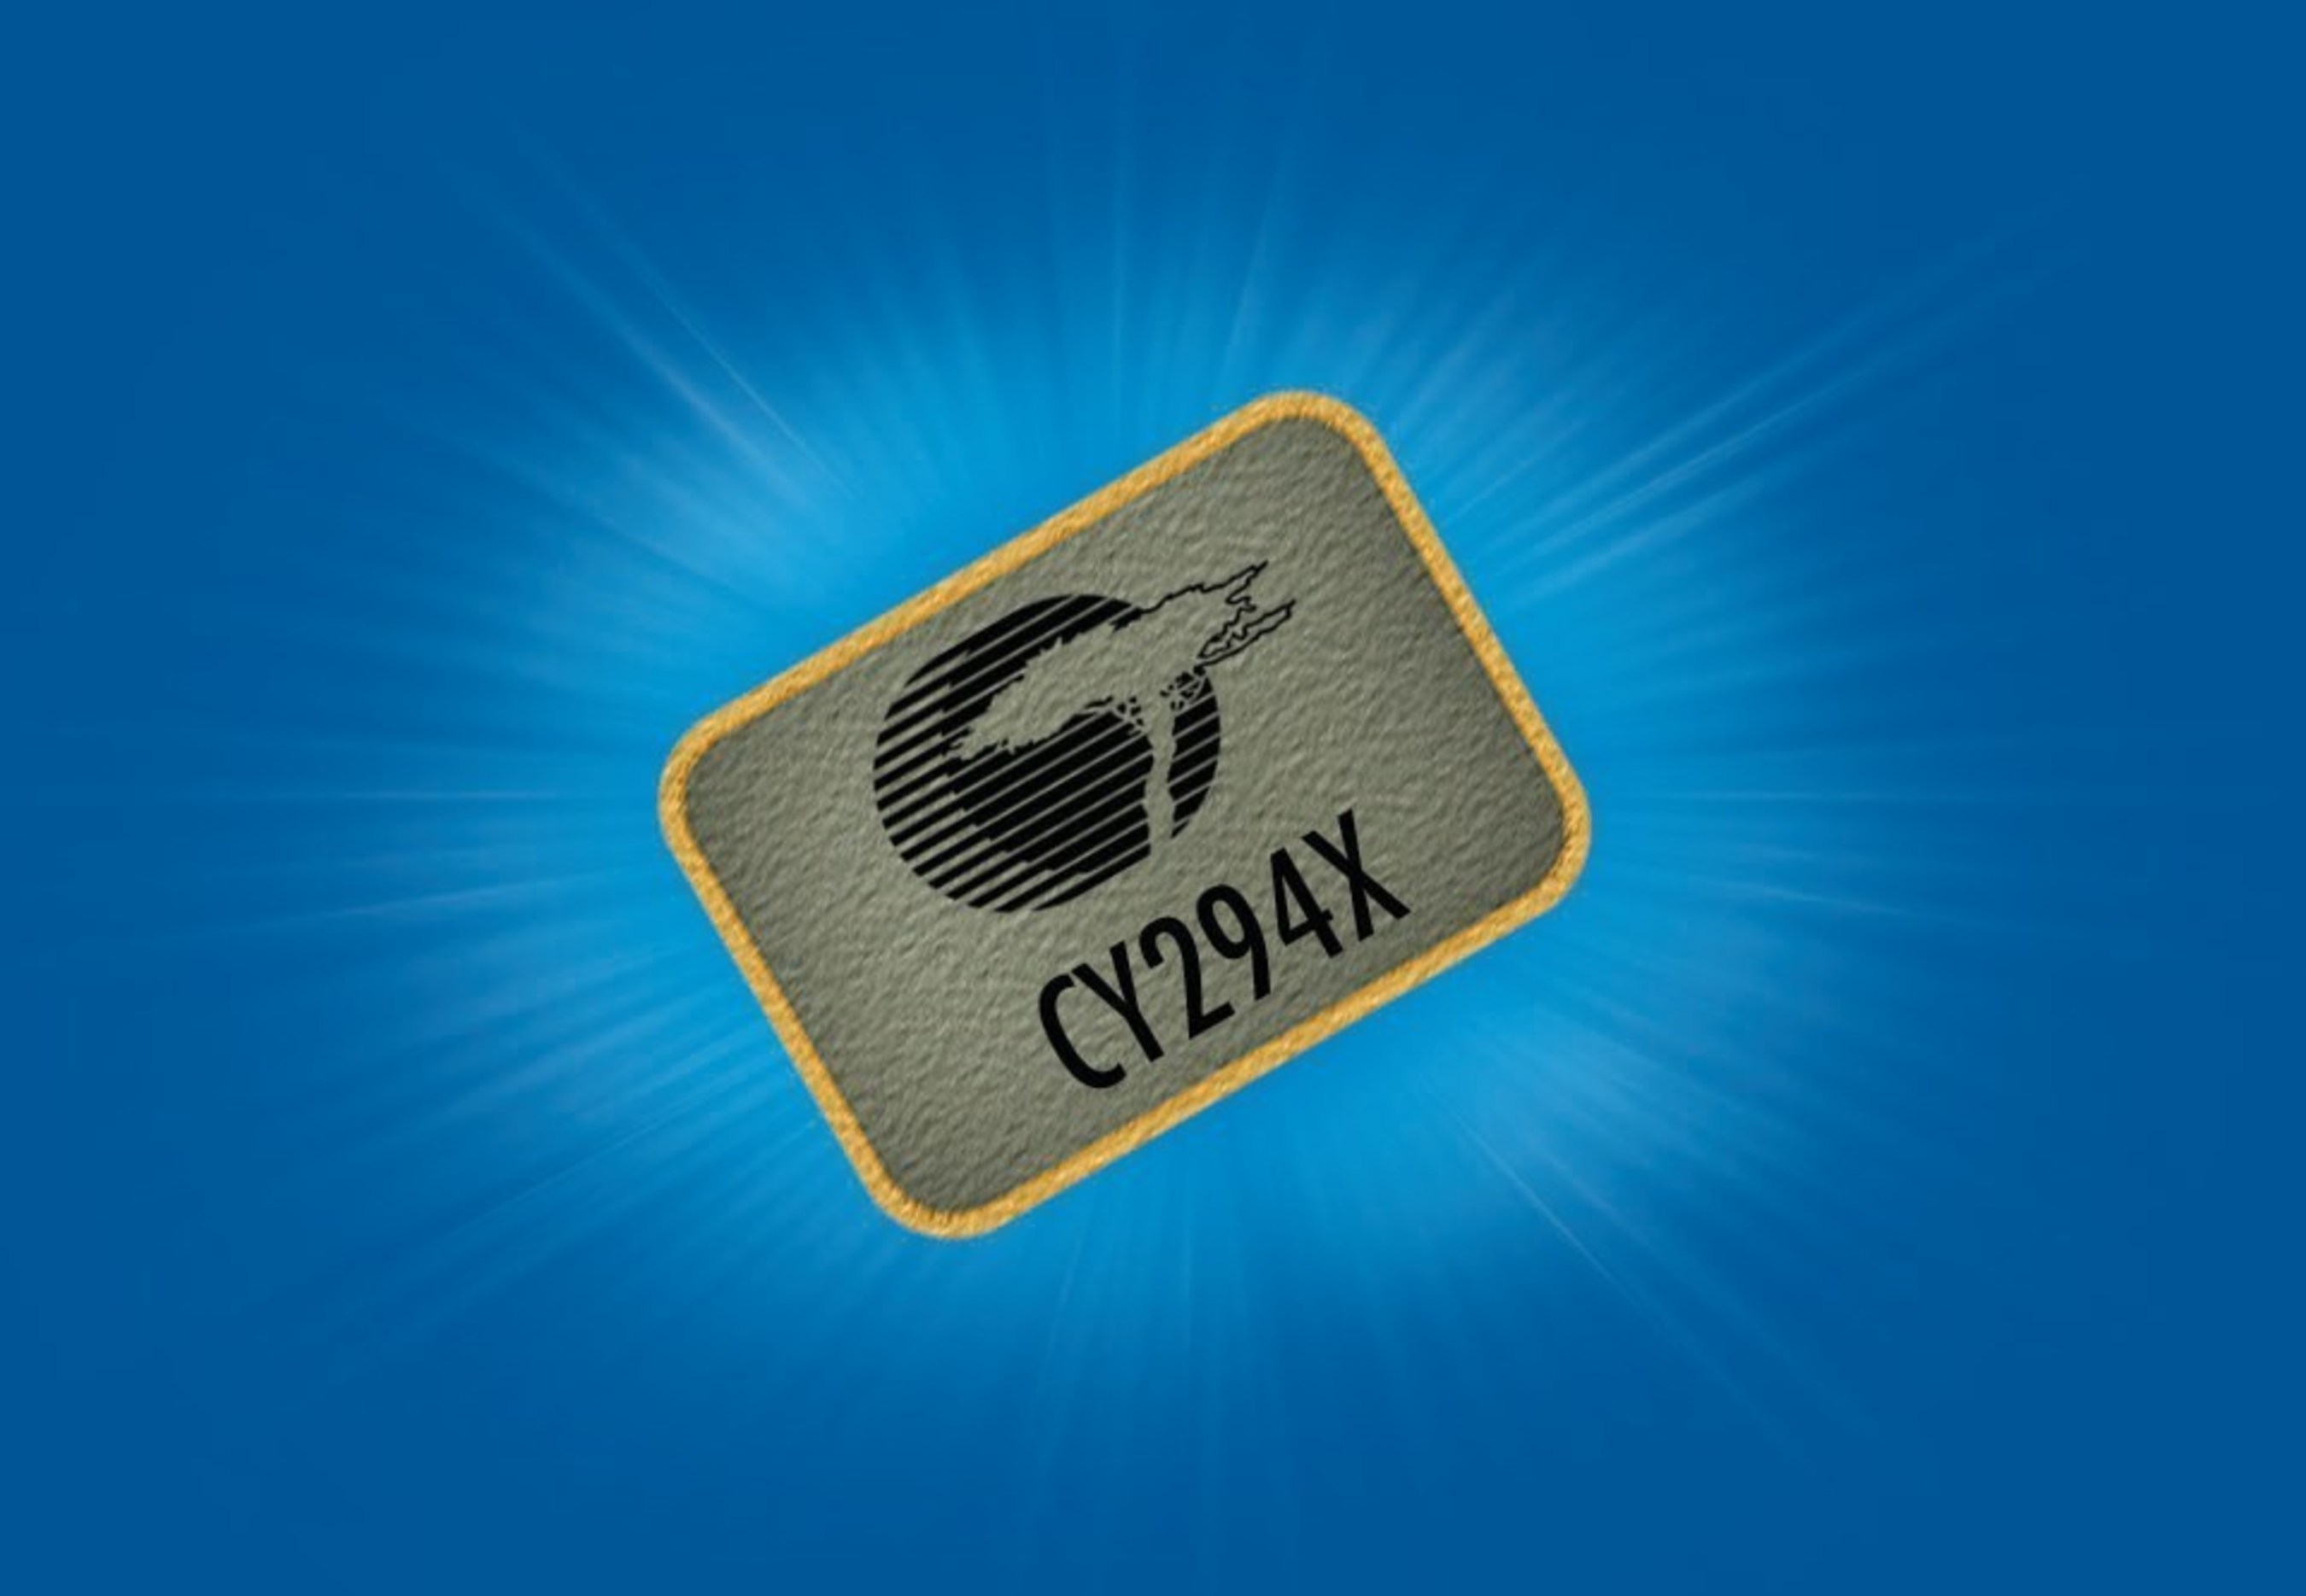 Pictured is Cypress's CY294X high-performance programmable oscillator, delivers best-in-class jitter performance and a broad range of output frequencies for next-generation networking systems.